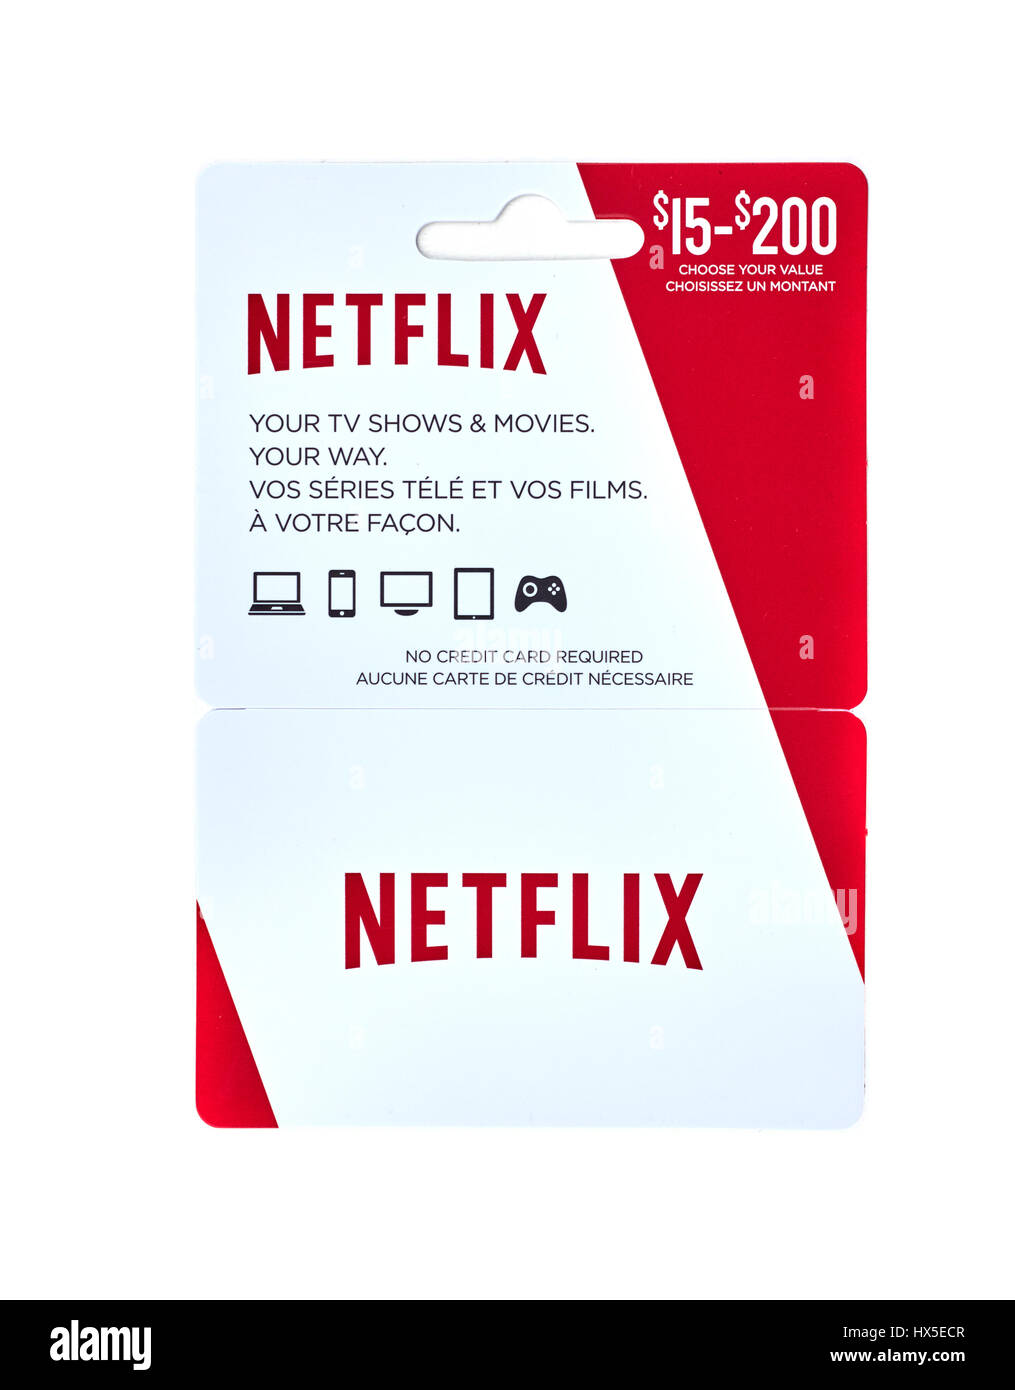 MONTREAL, CANADA - MARCH 10, 2017 : Netflix popular giftcard. The card is a prepaid stored-value money card issued to be used as an alternative to cas Stock Photo